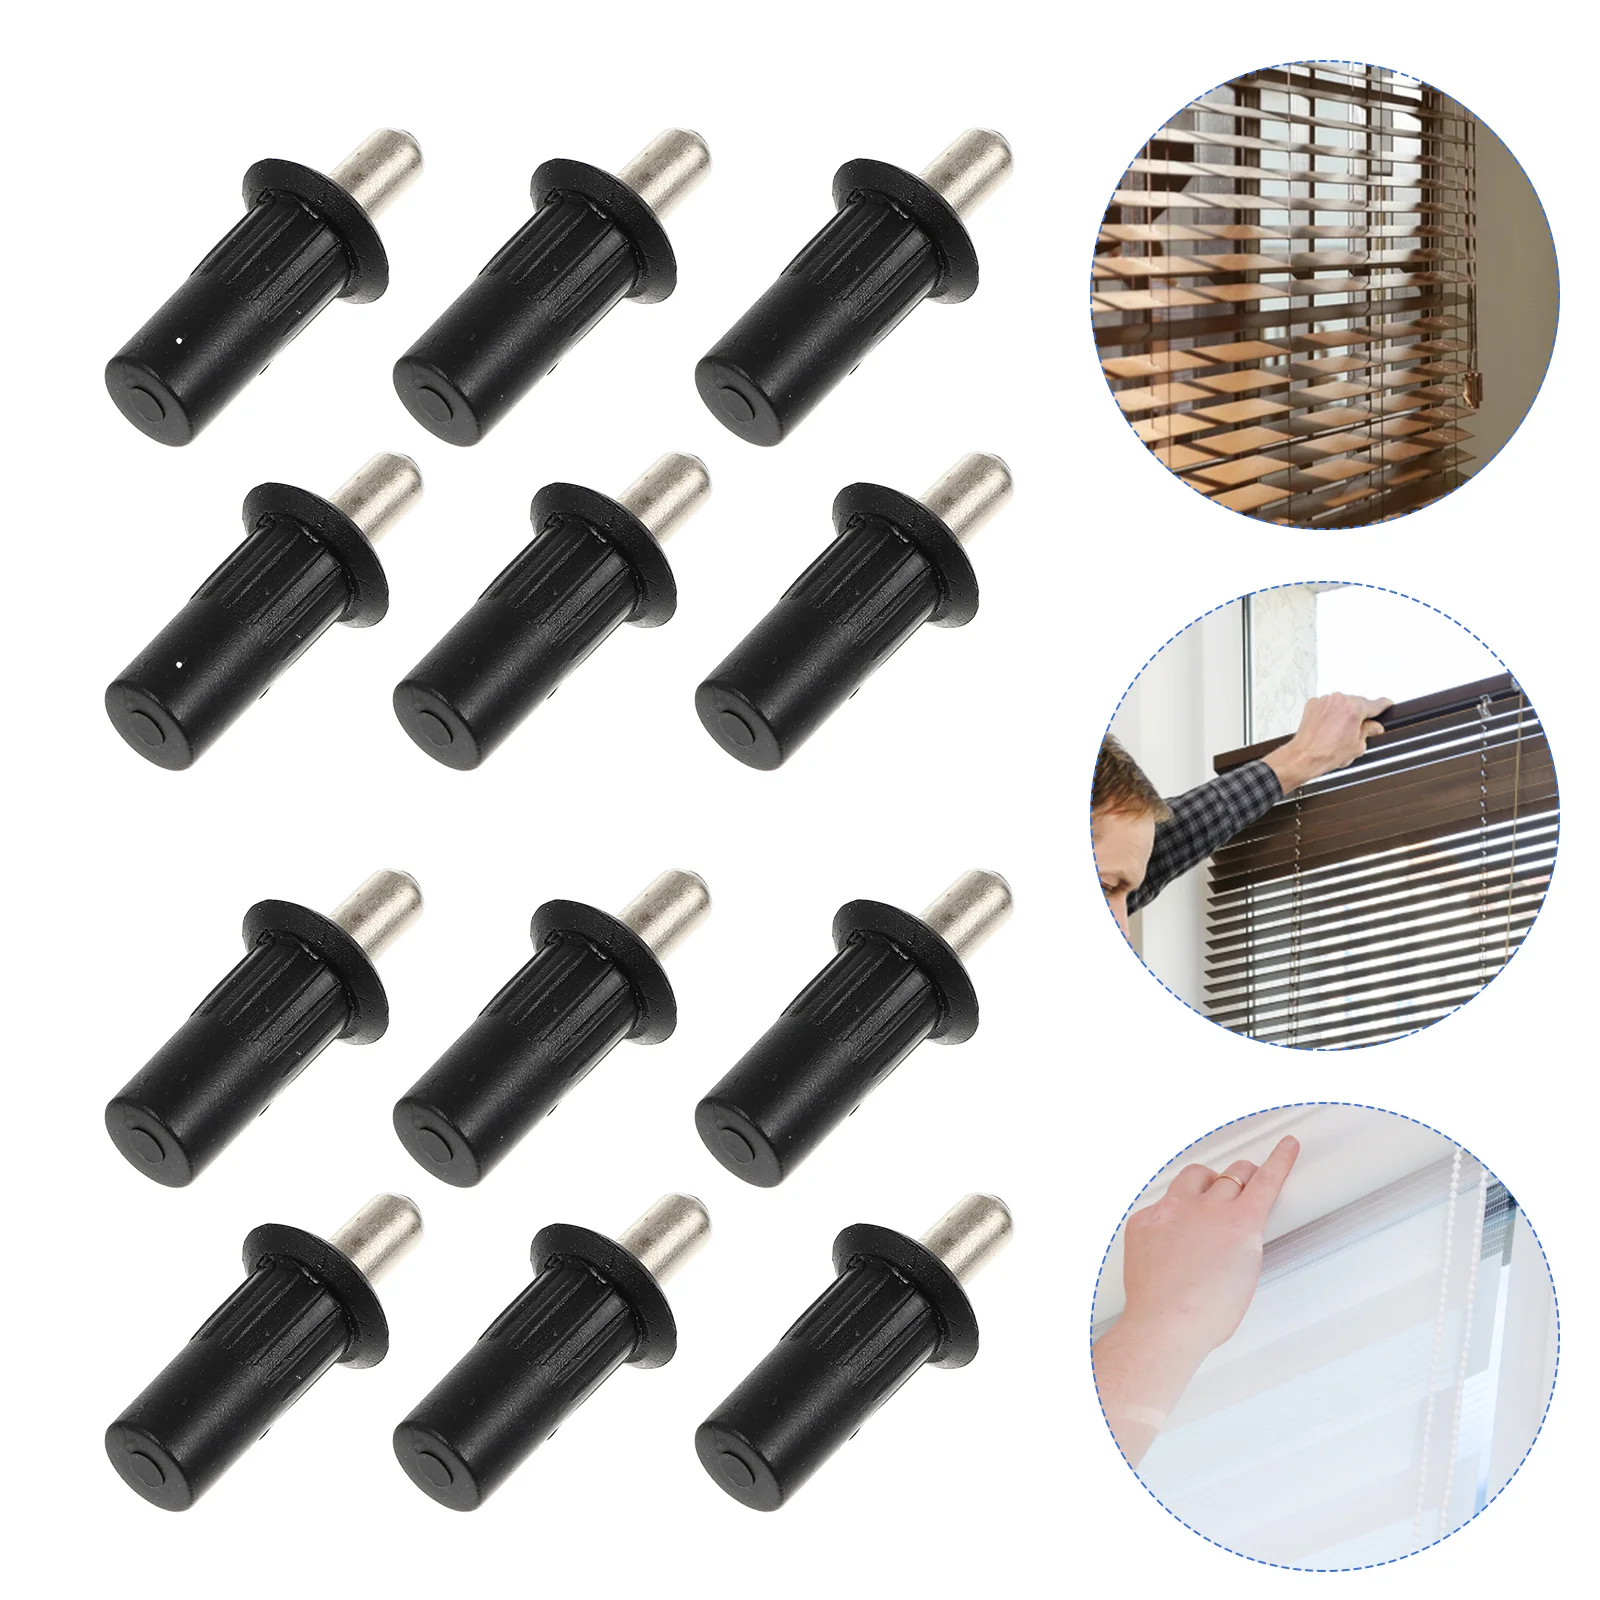 

Shutter Repair Pin Replacementbolt Plantation Iron Telescopic Shutters Louvers Spring Universal Loaded Window Kit Parts Blinds